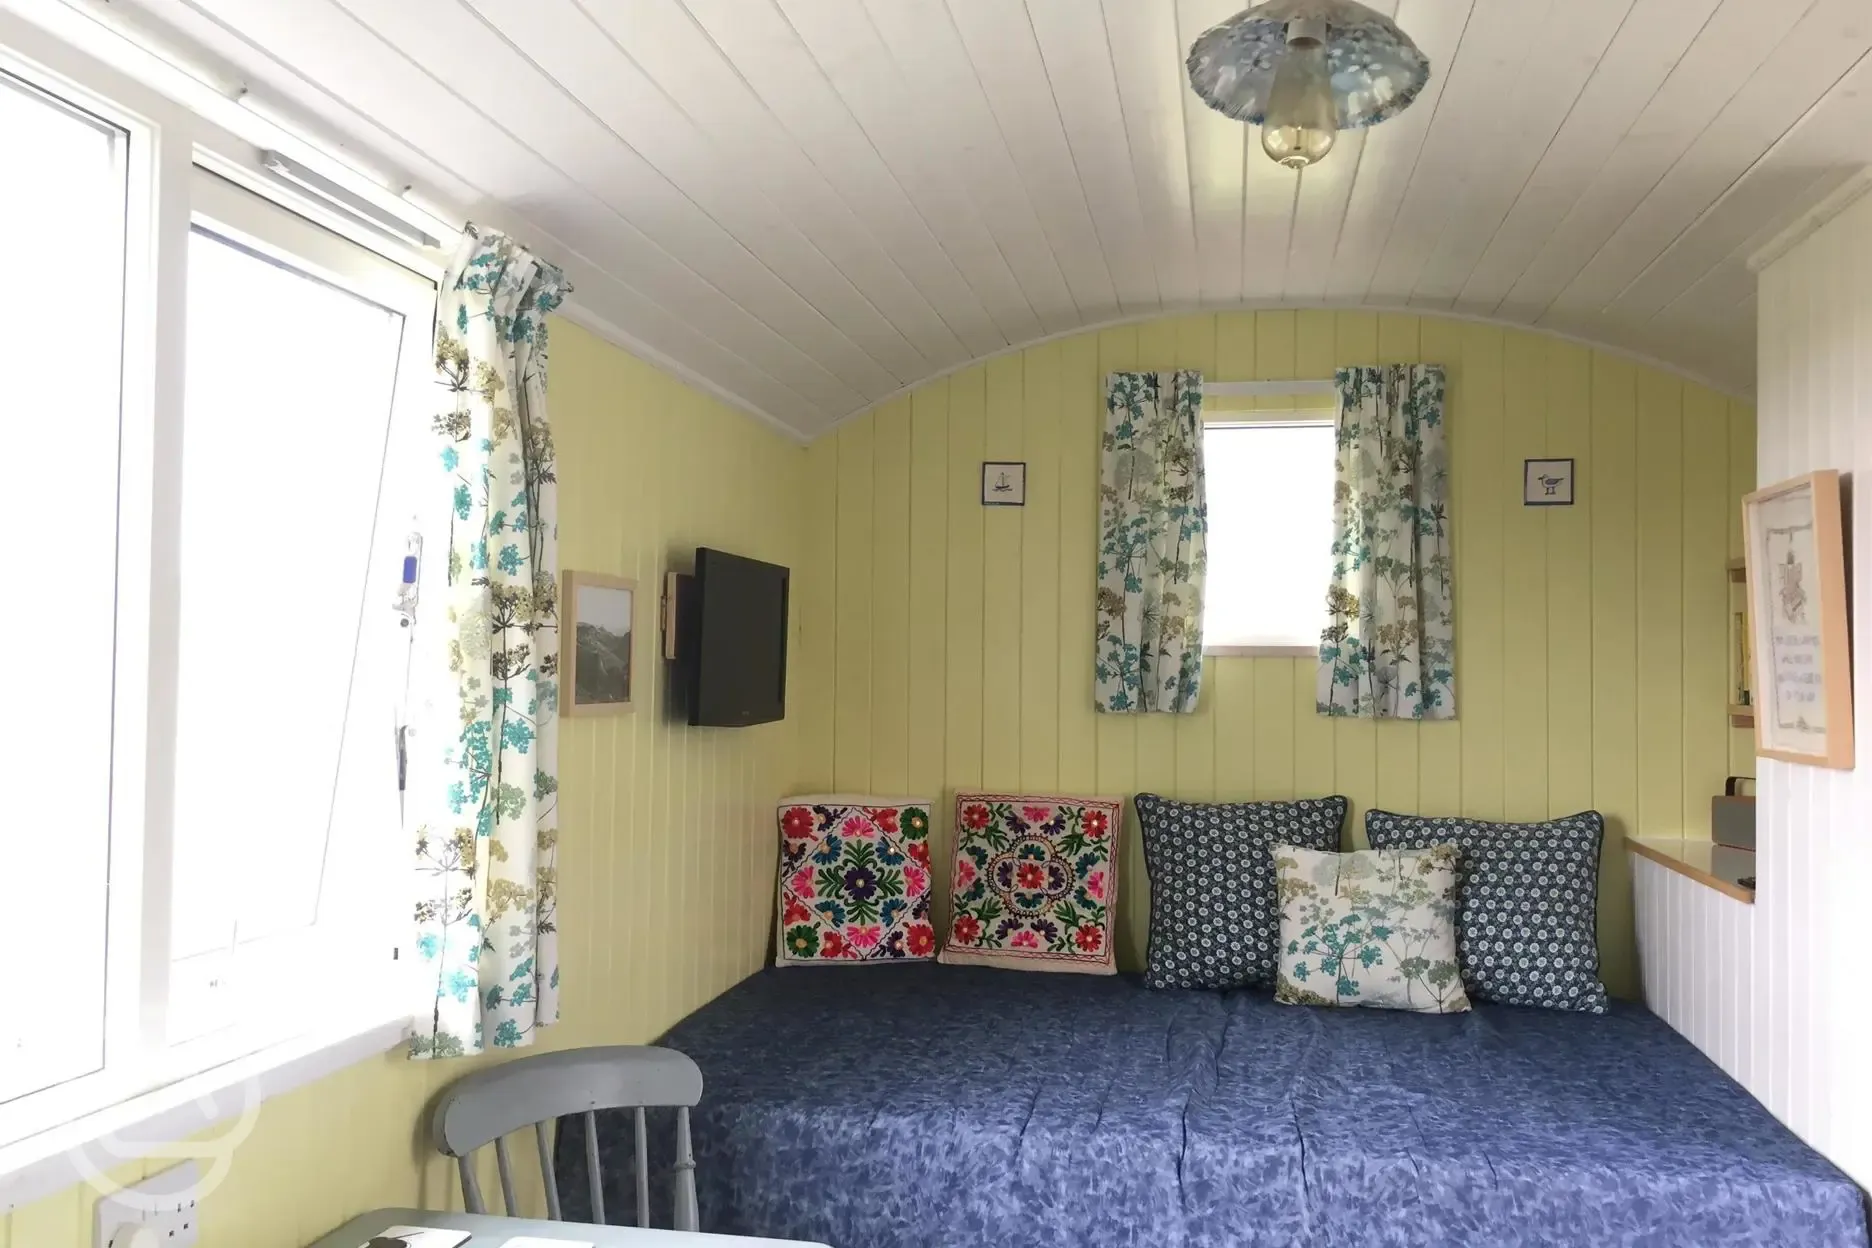 The Shepherd's Huts in Mangersta contain one double bed.